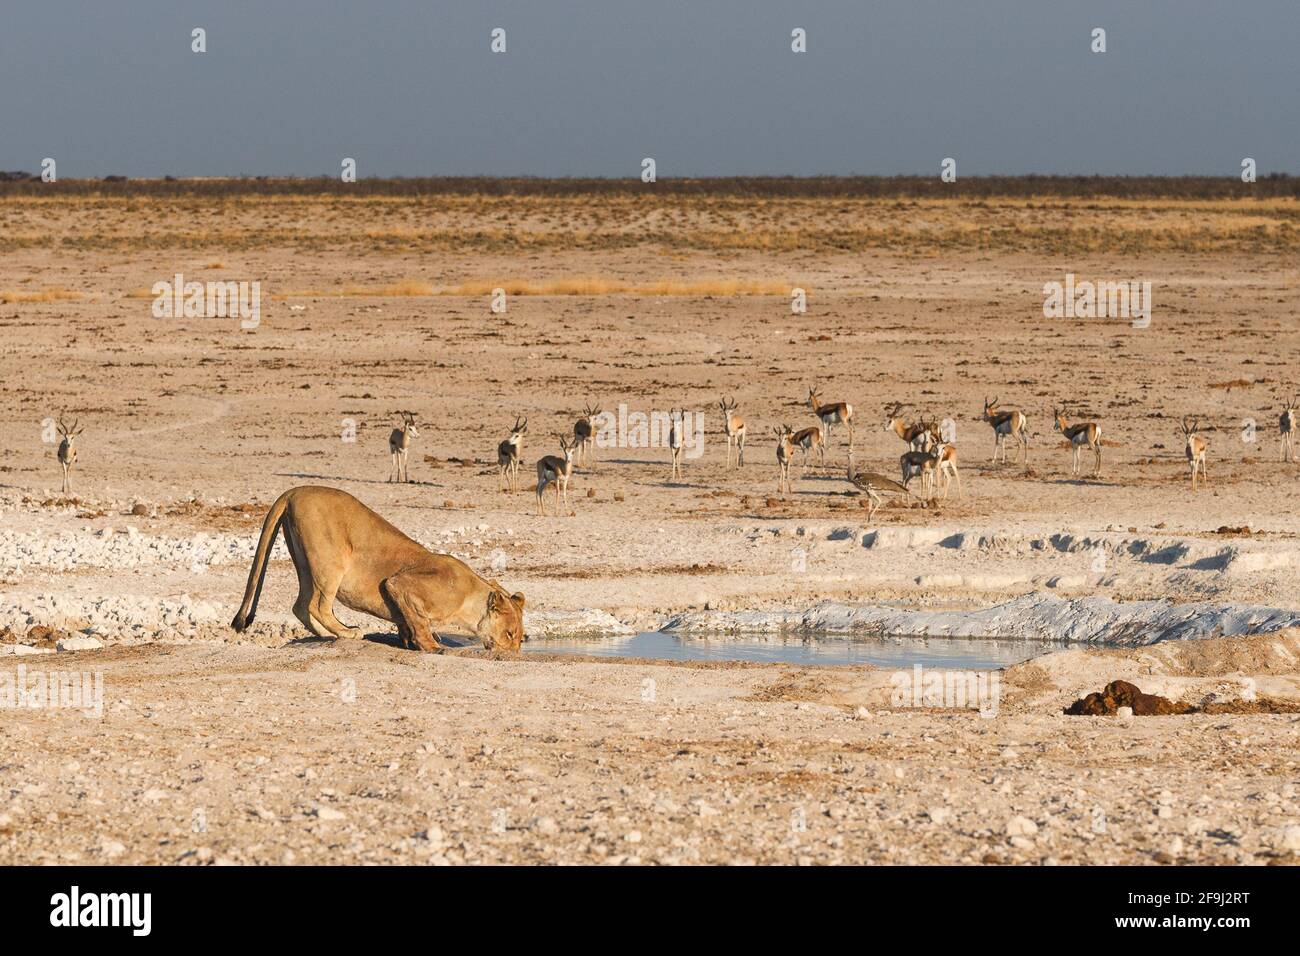 African lioness (Panthera Leo) drinking, behind her a herd Springboks. Etosha National Park, Namibia, Africa Stock Photo